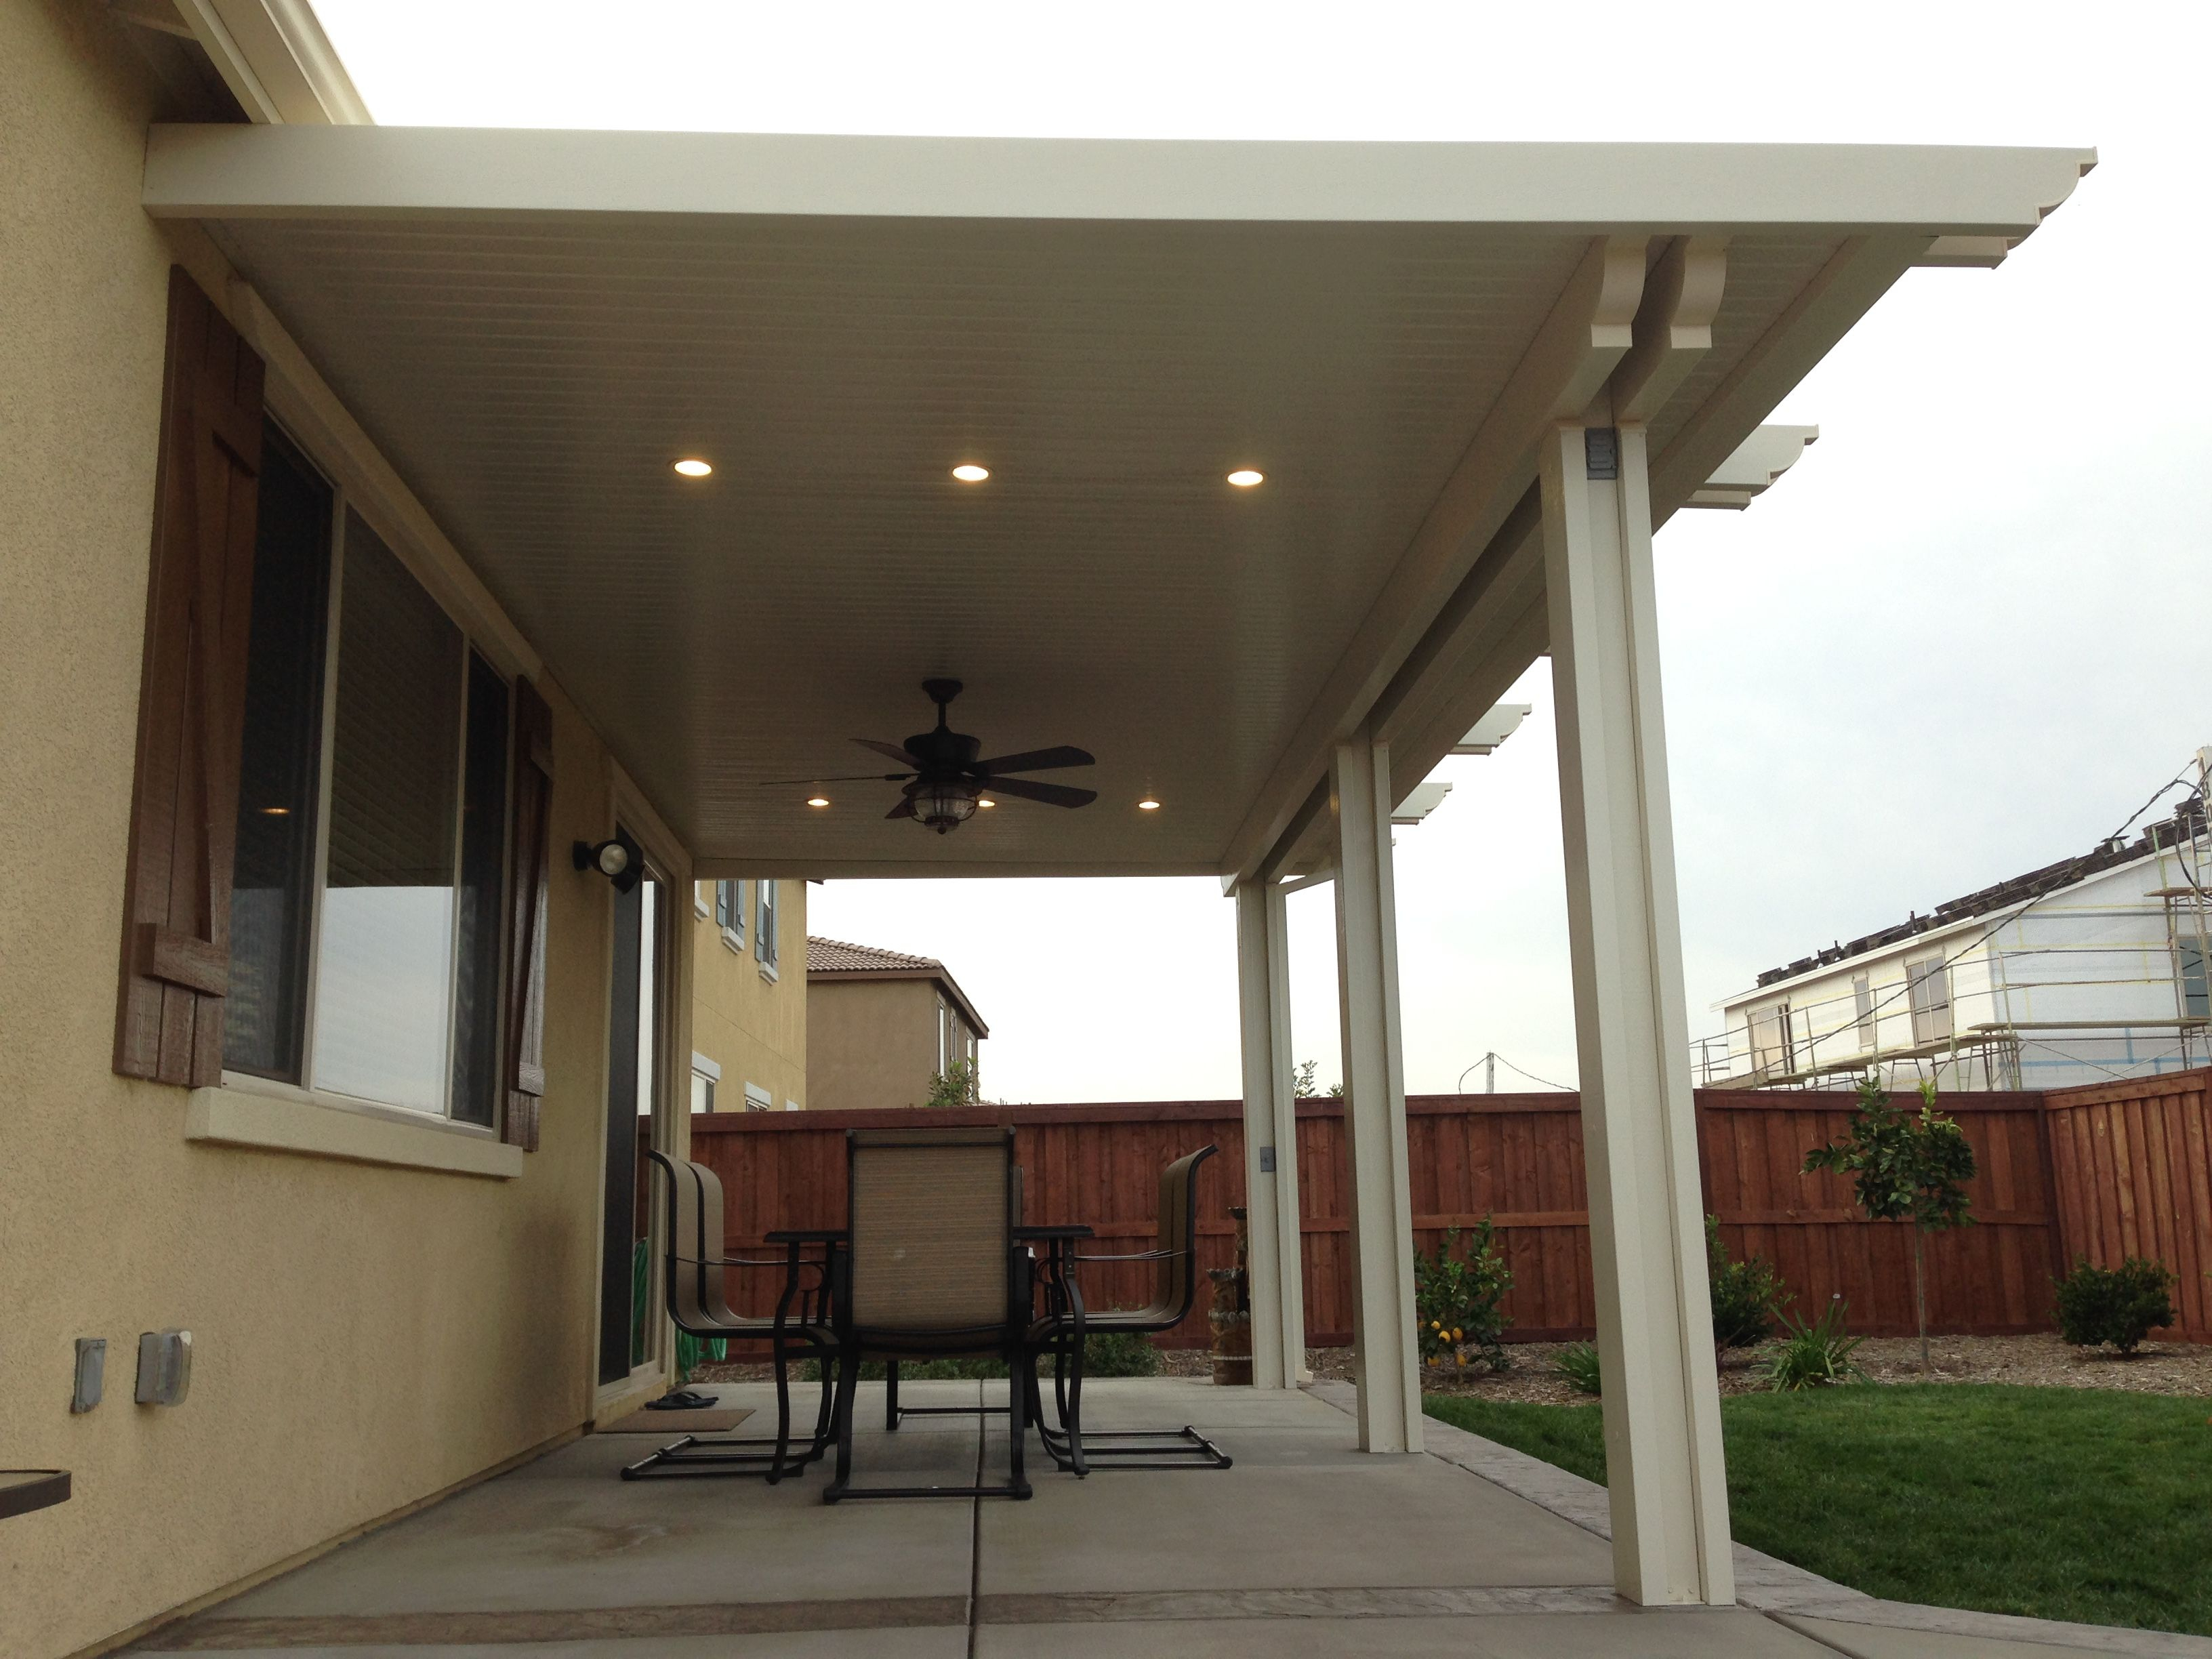 Alumawood Patio Cover With Fan And Two Lightstrips Canned regarding measurements 3264 X 2448